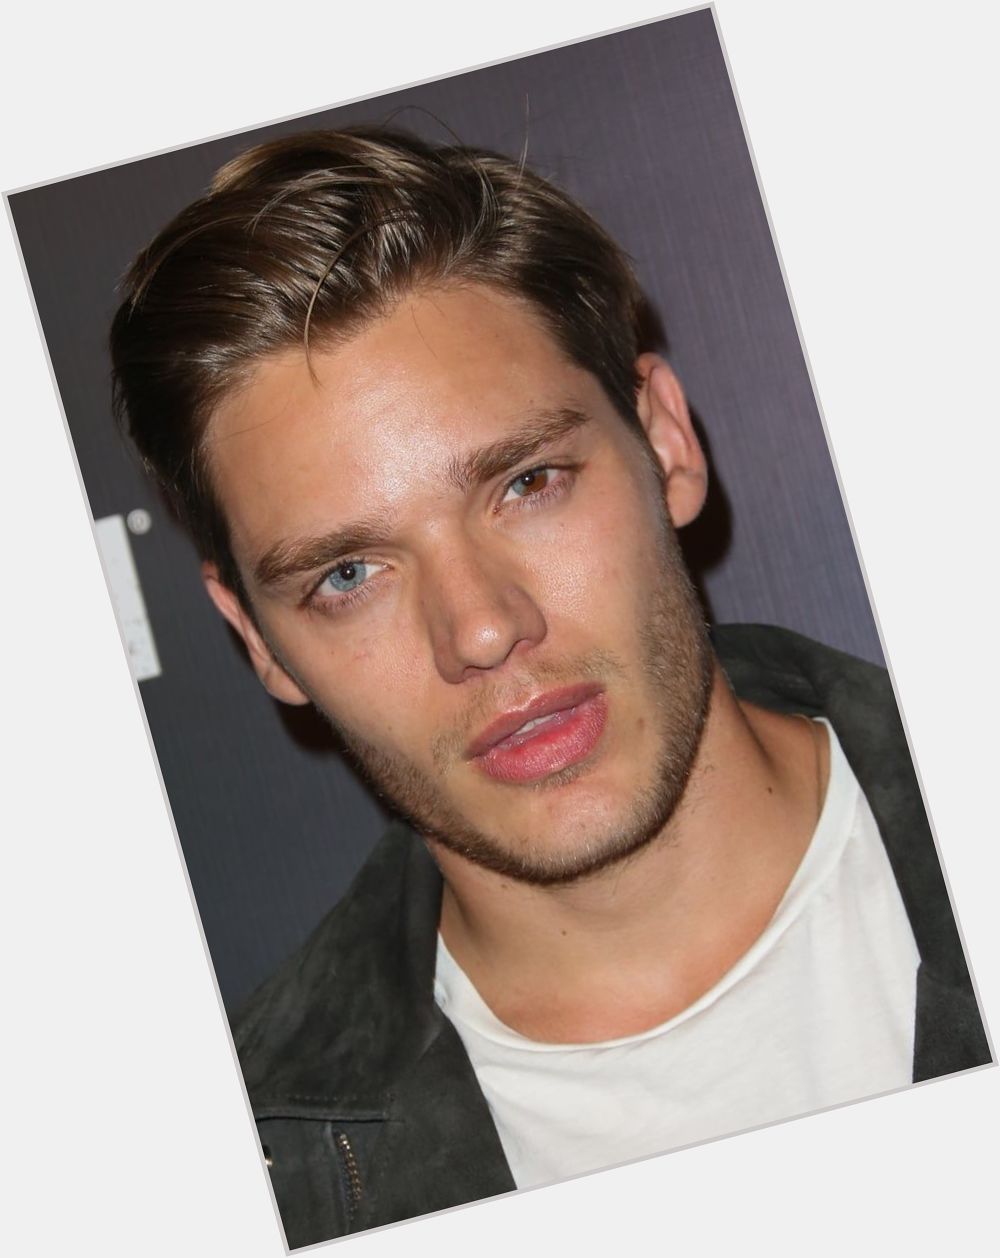 <a href="/hot-men/dominic-sherwood/where-dating-news-photos">Dominic Sherwood</a>  